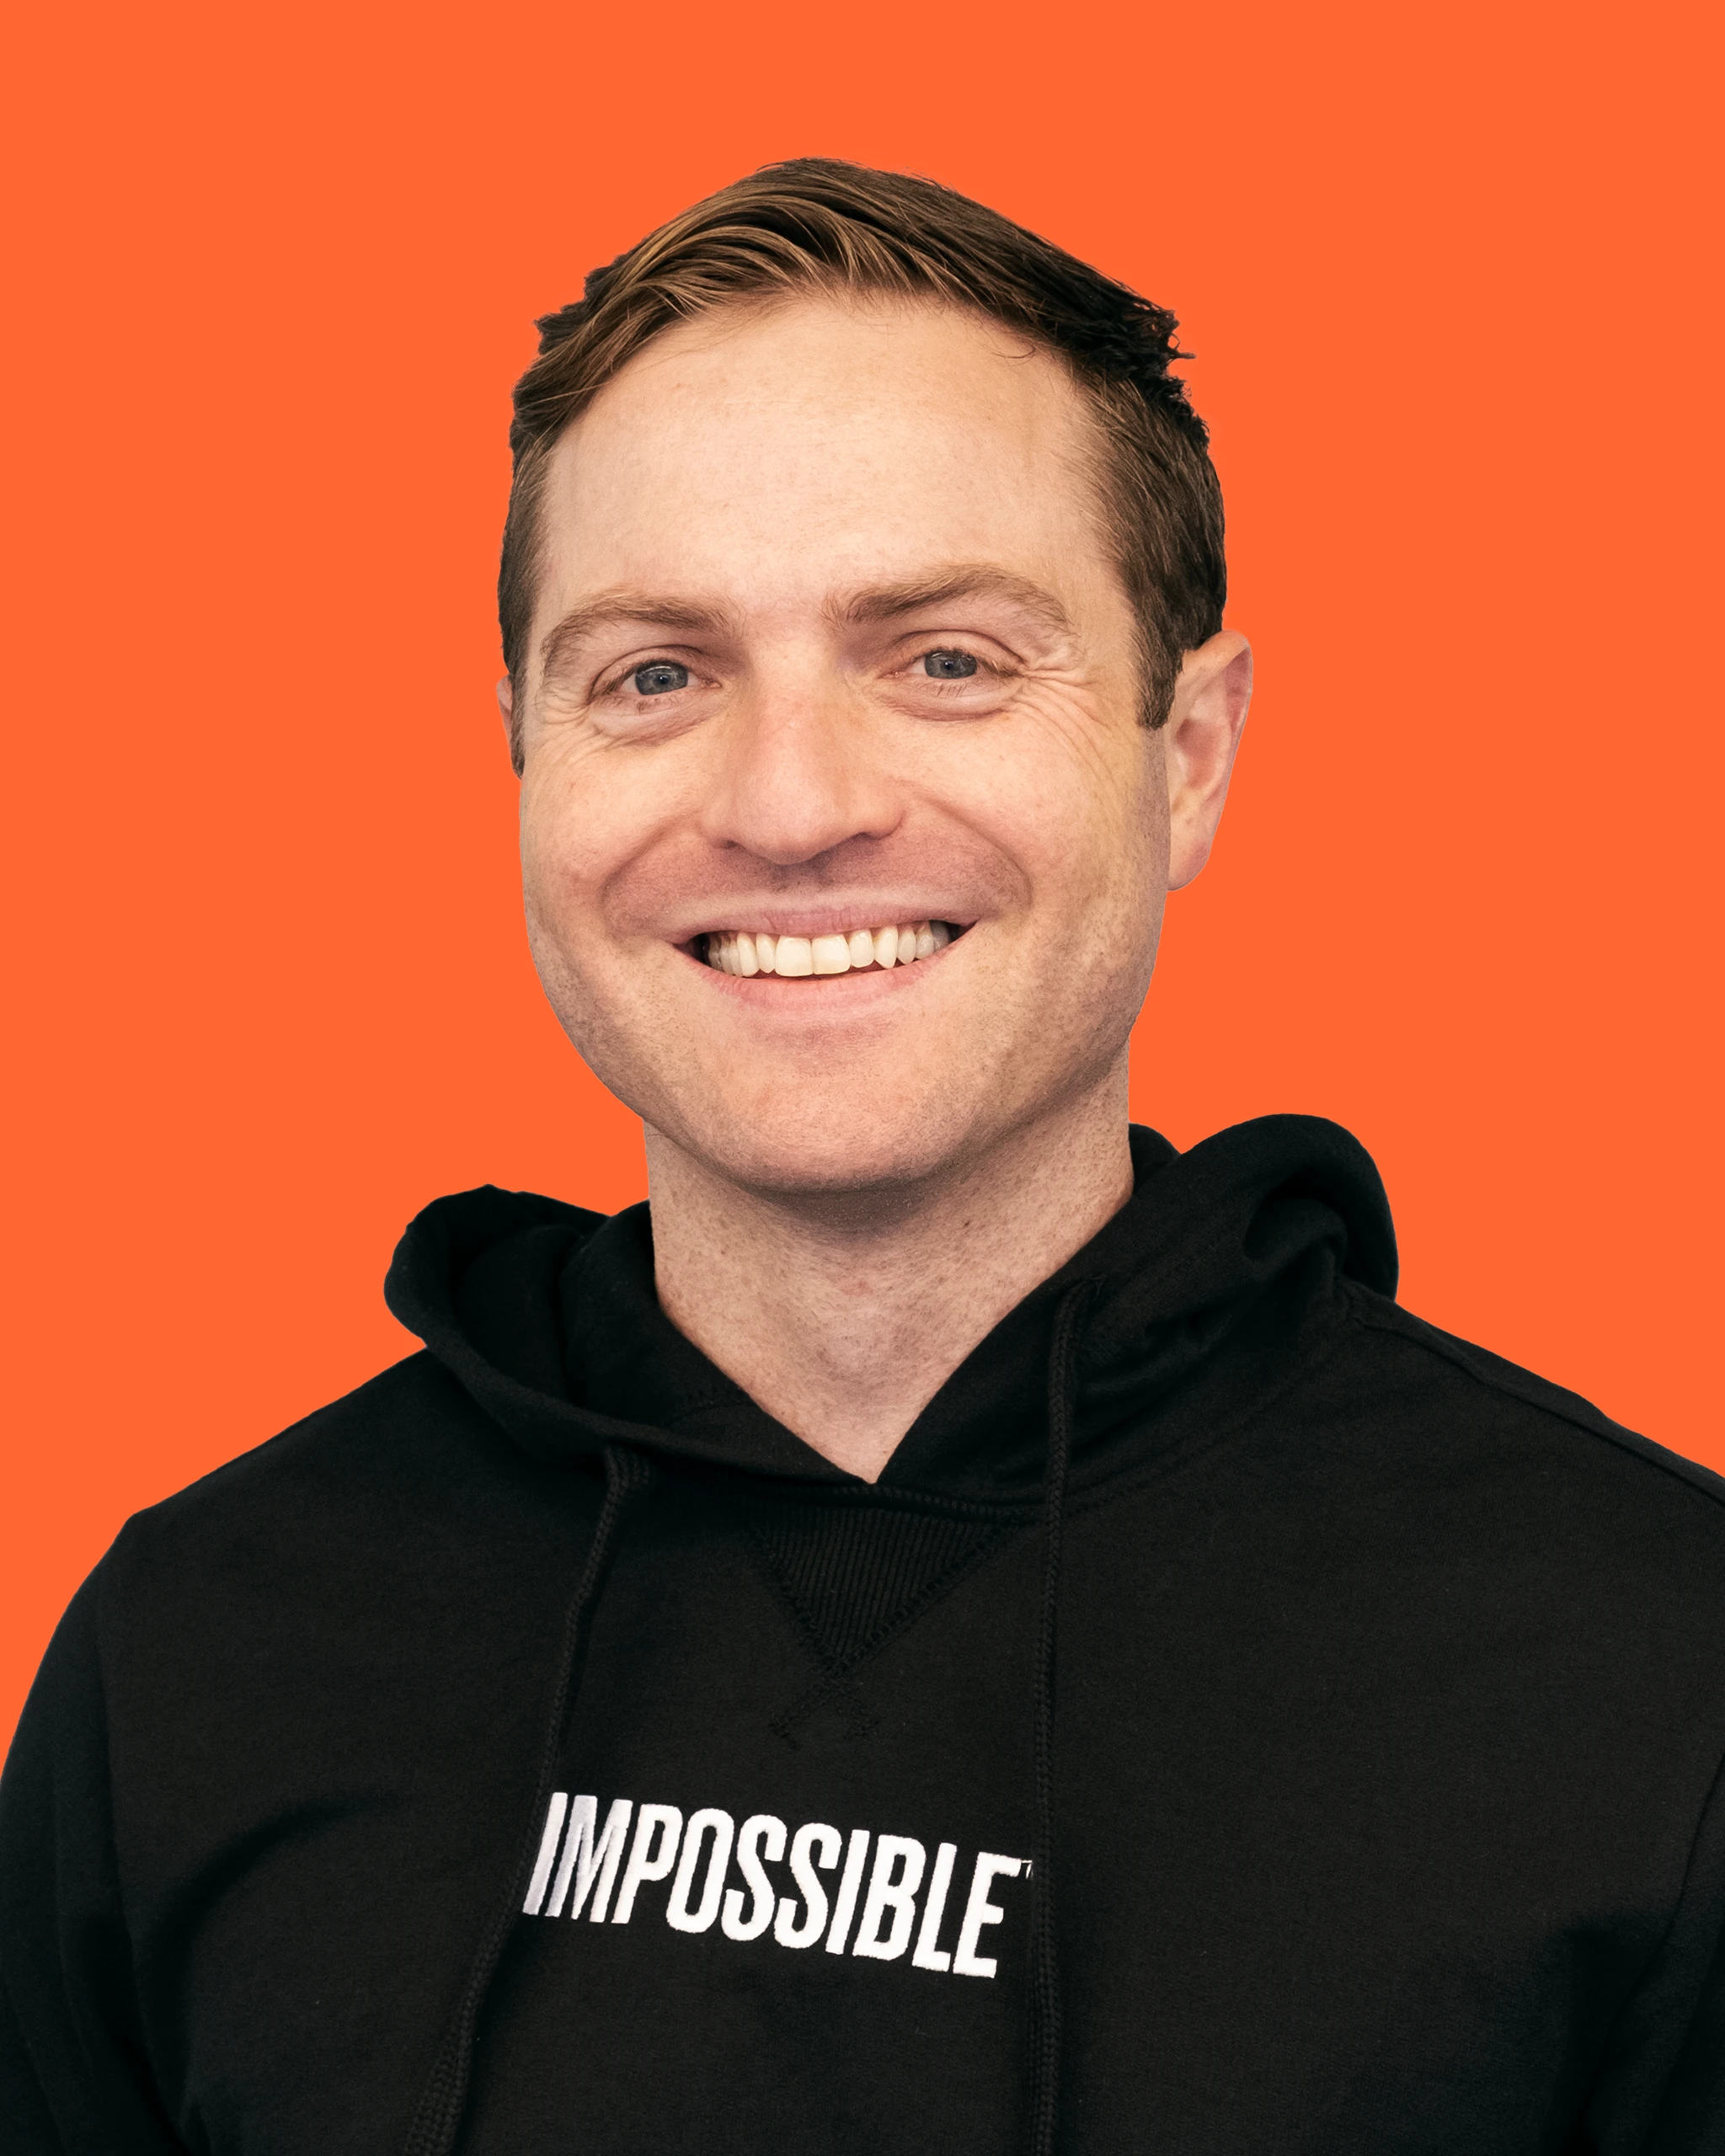 Nate serves as Chief of Staff and Head of Business Development at Impossible Foods.